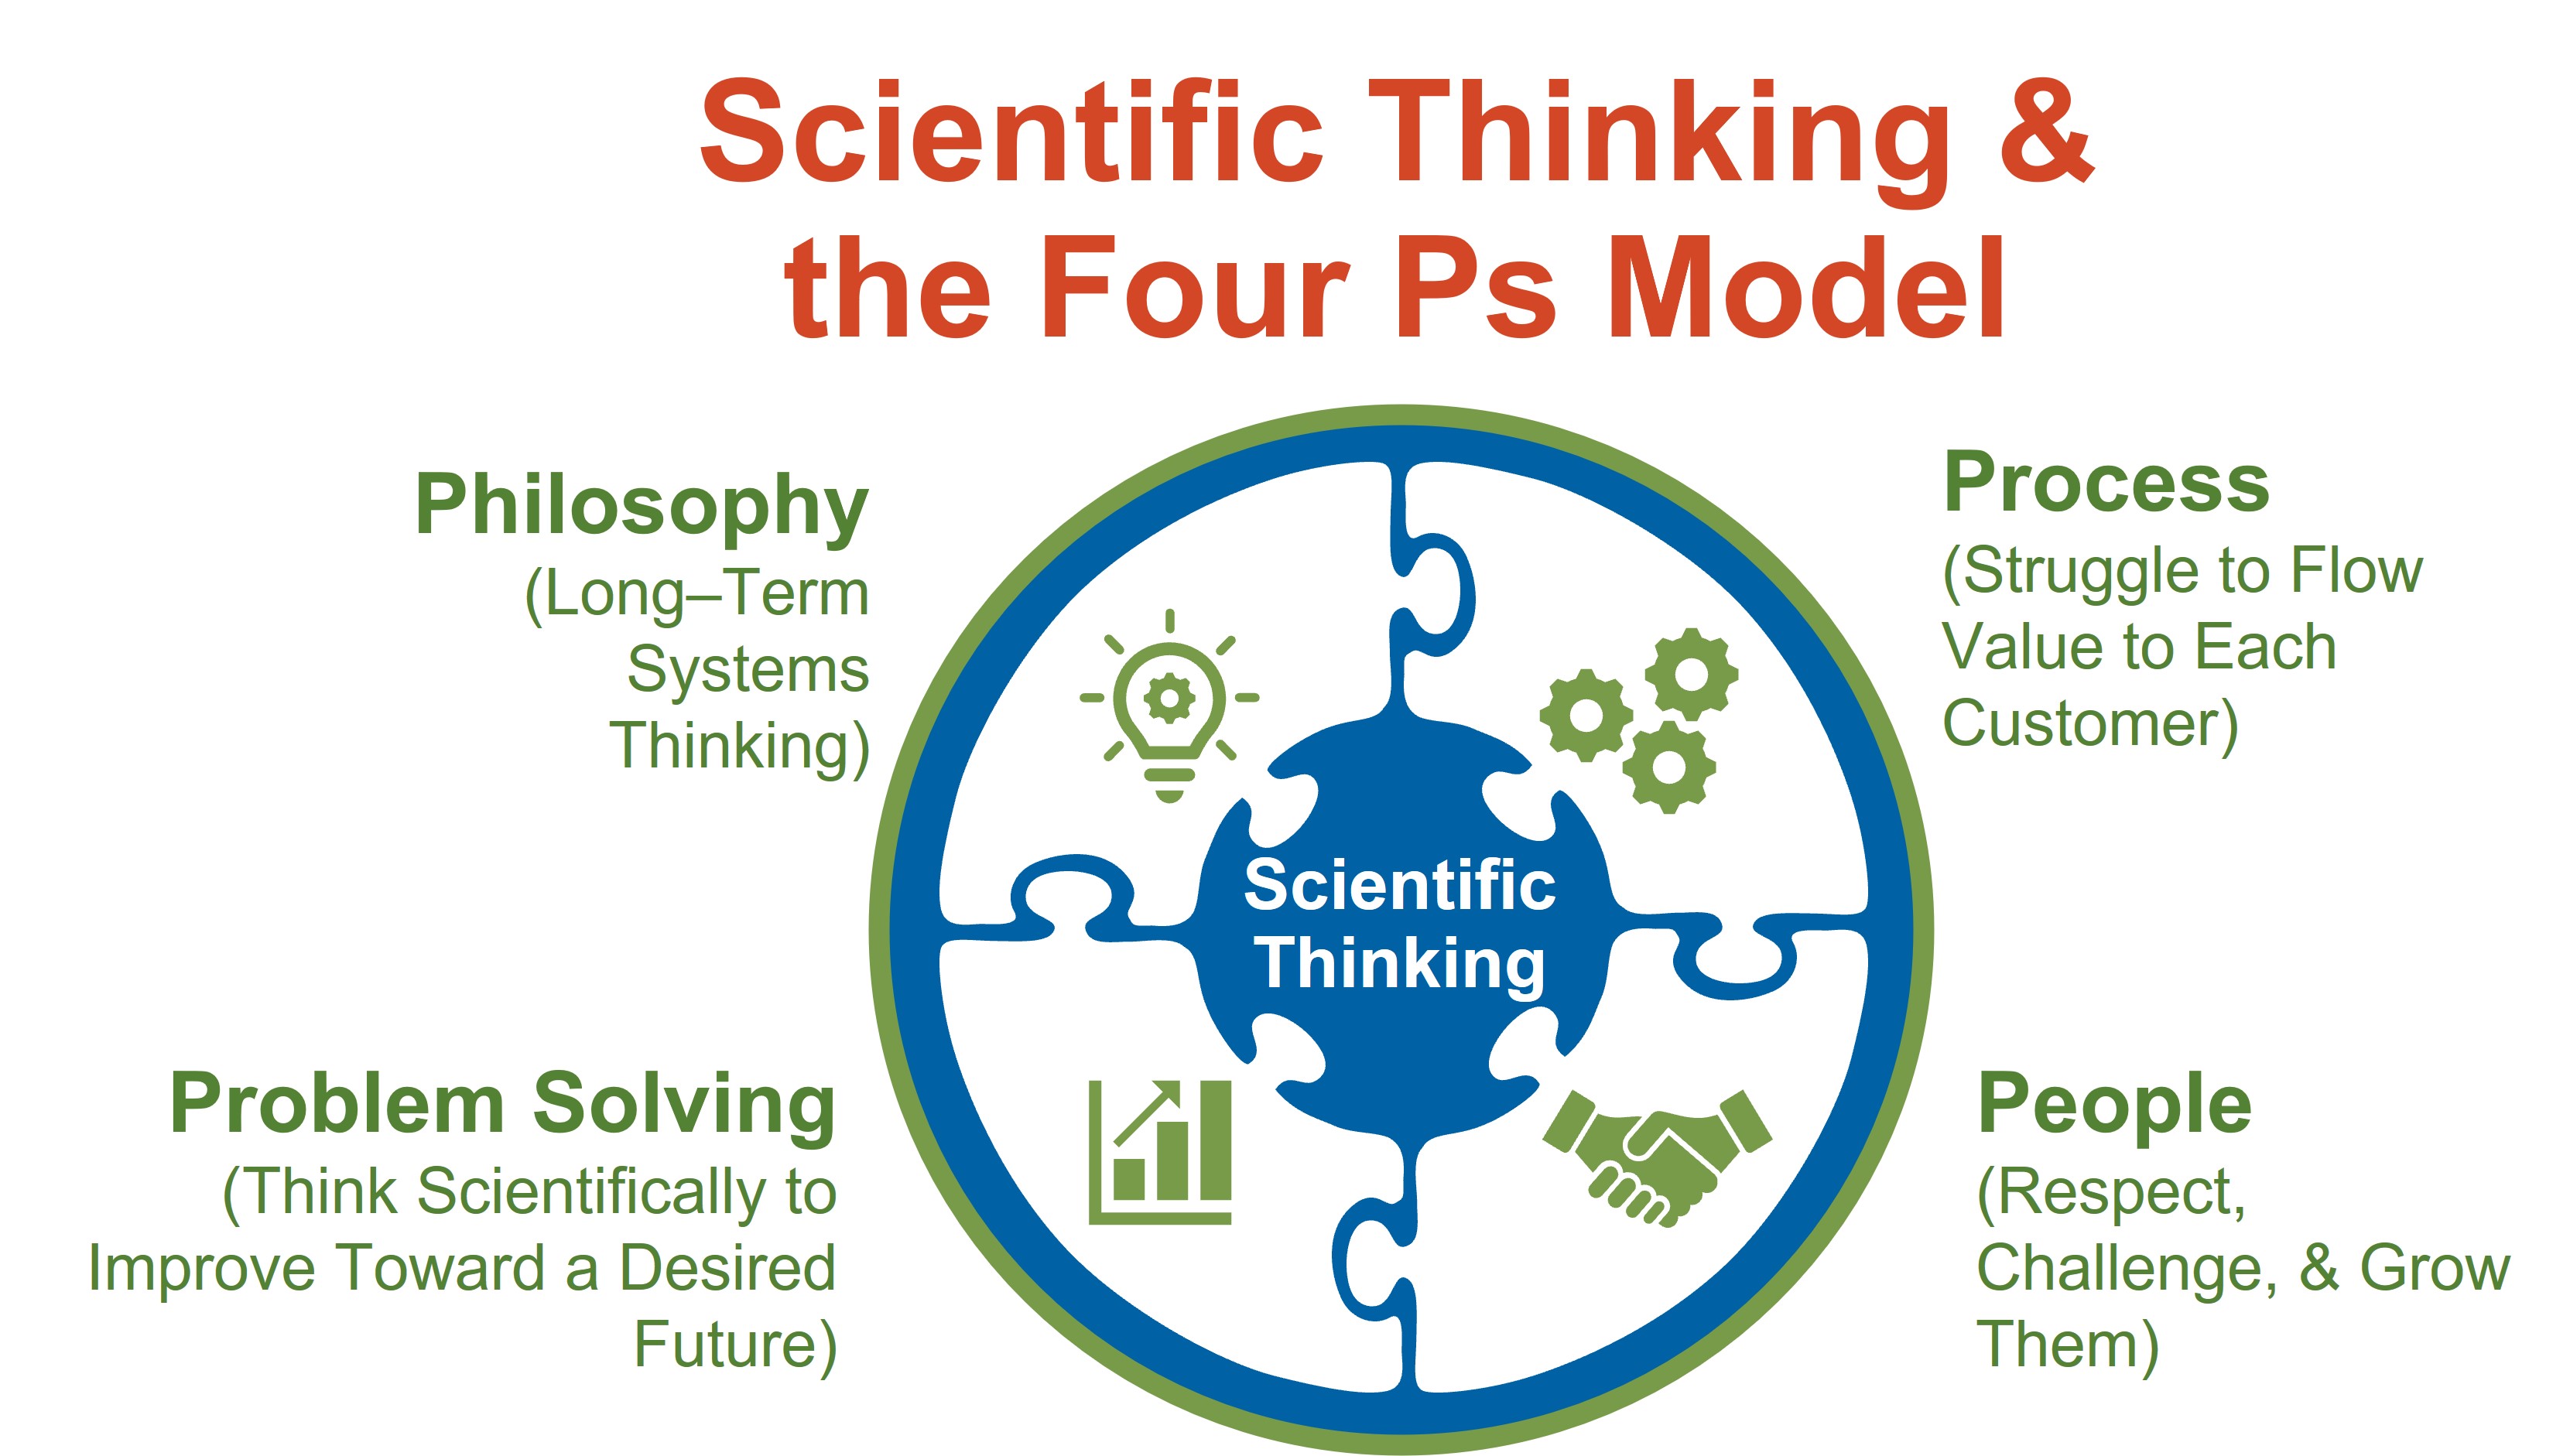 This image explains scientific thinking and the four Ps model - philosophy, process, problem solving, and people